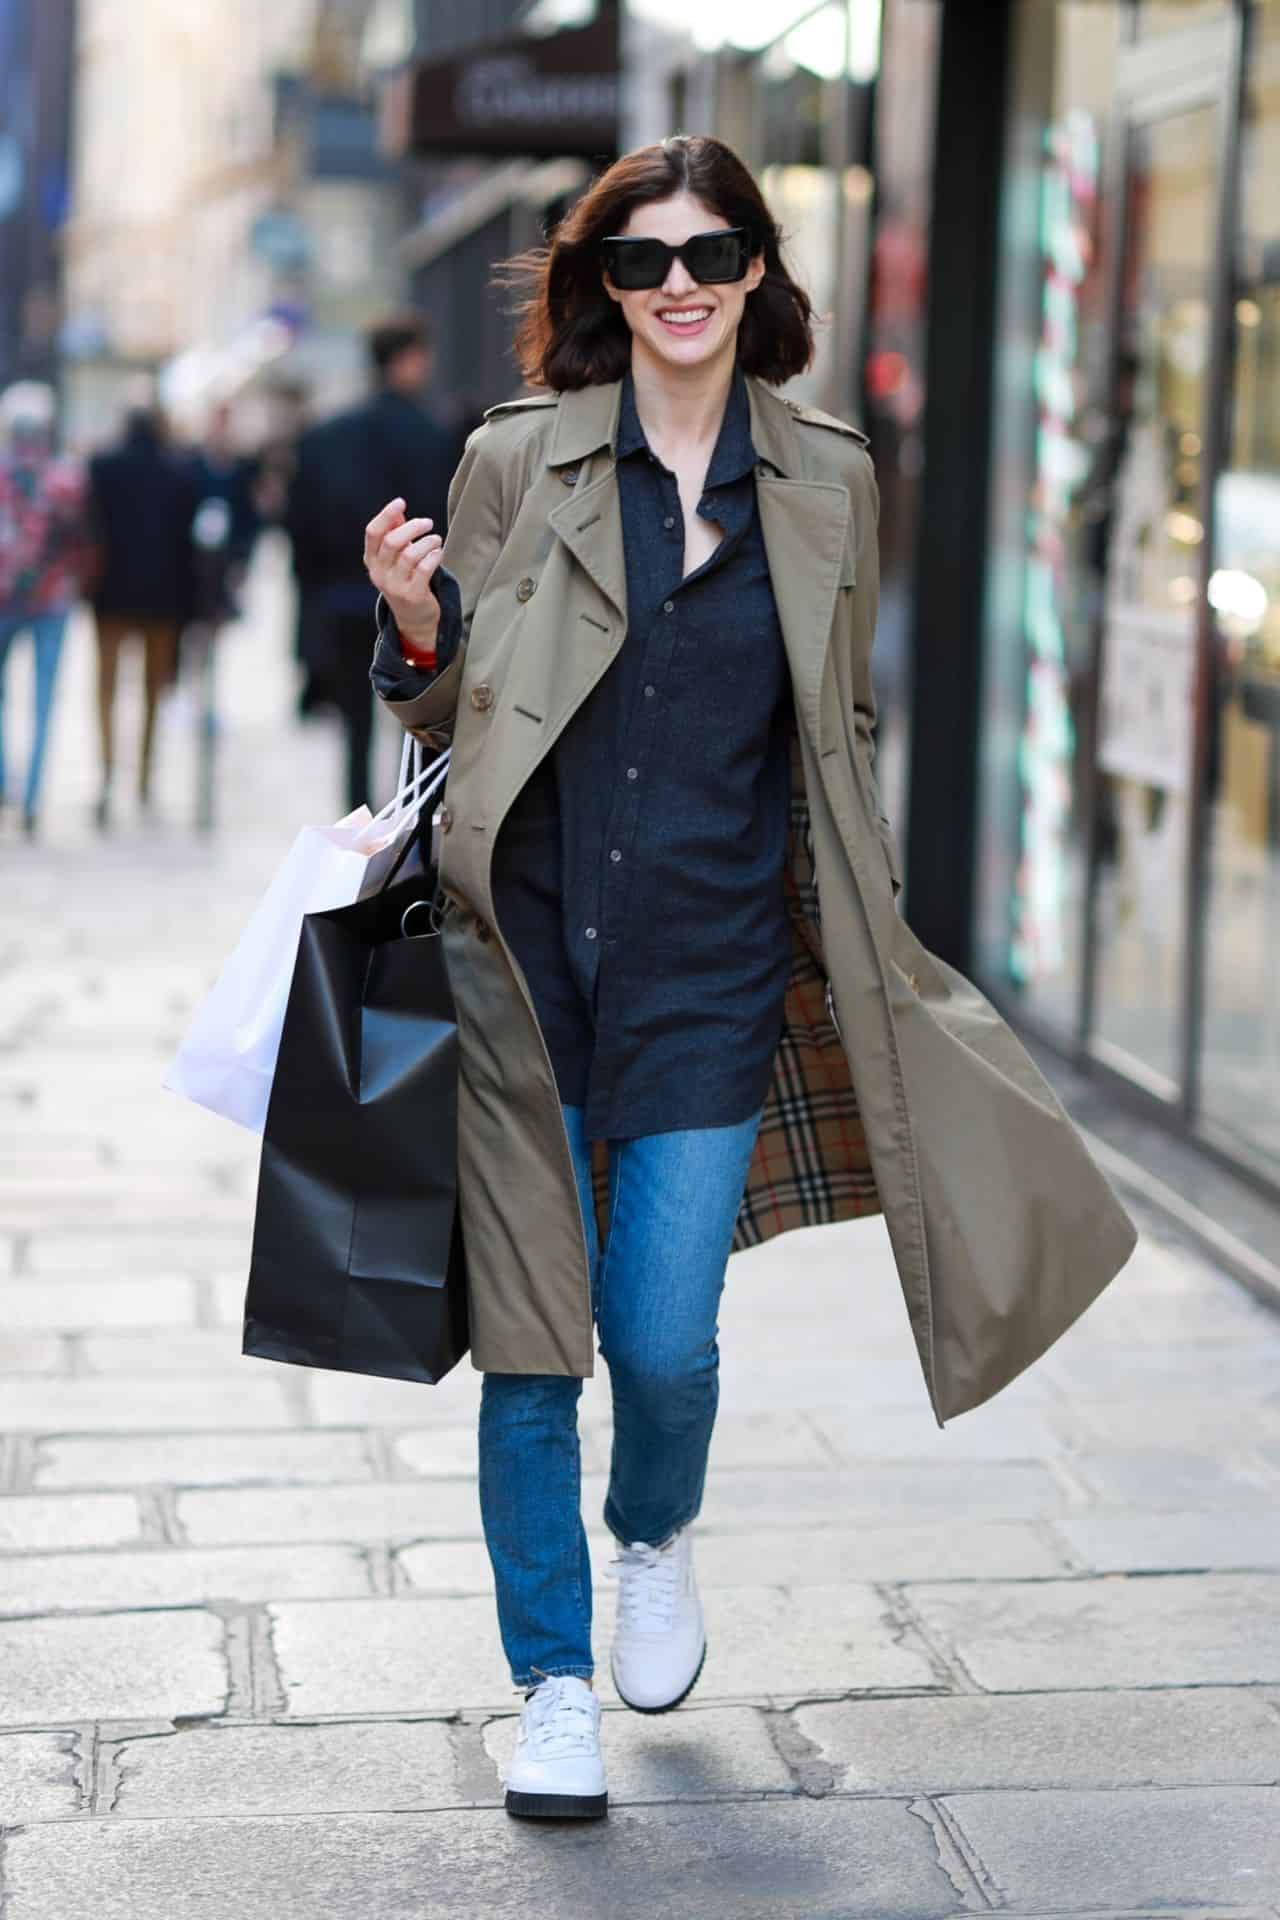 Alexandra Daddario Turns Heads in a Gray Coat While Shopping in Paris